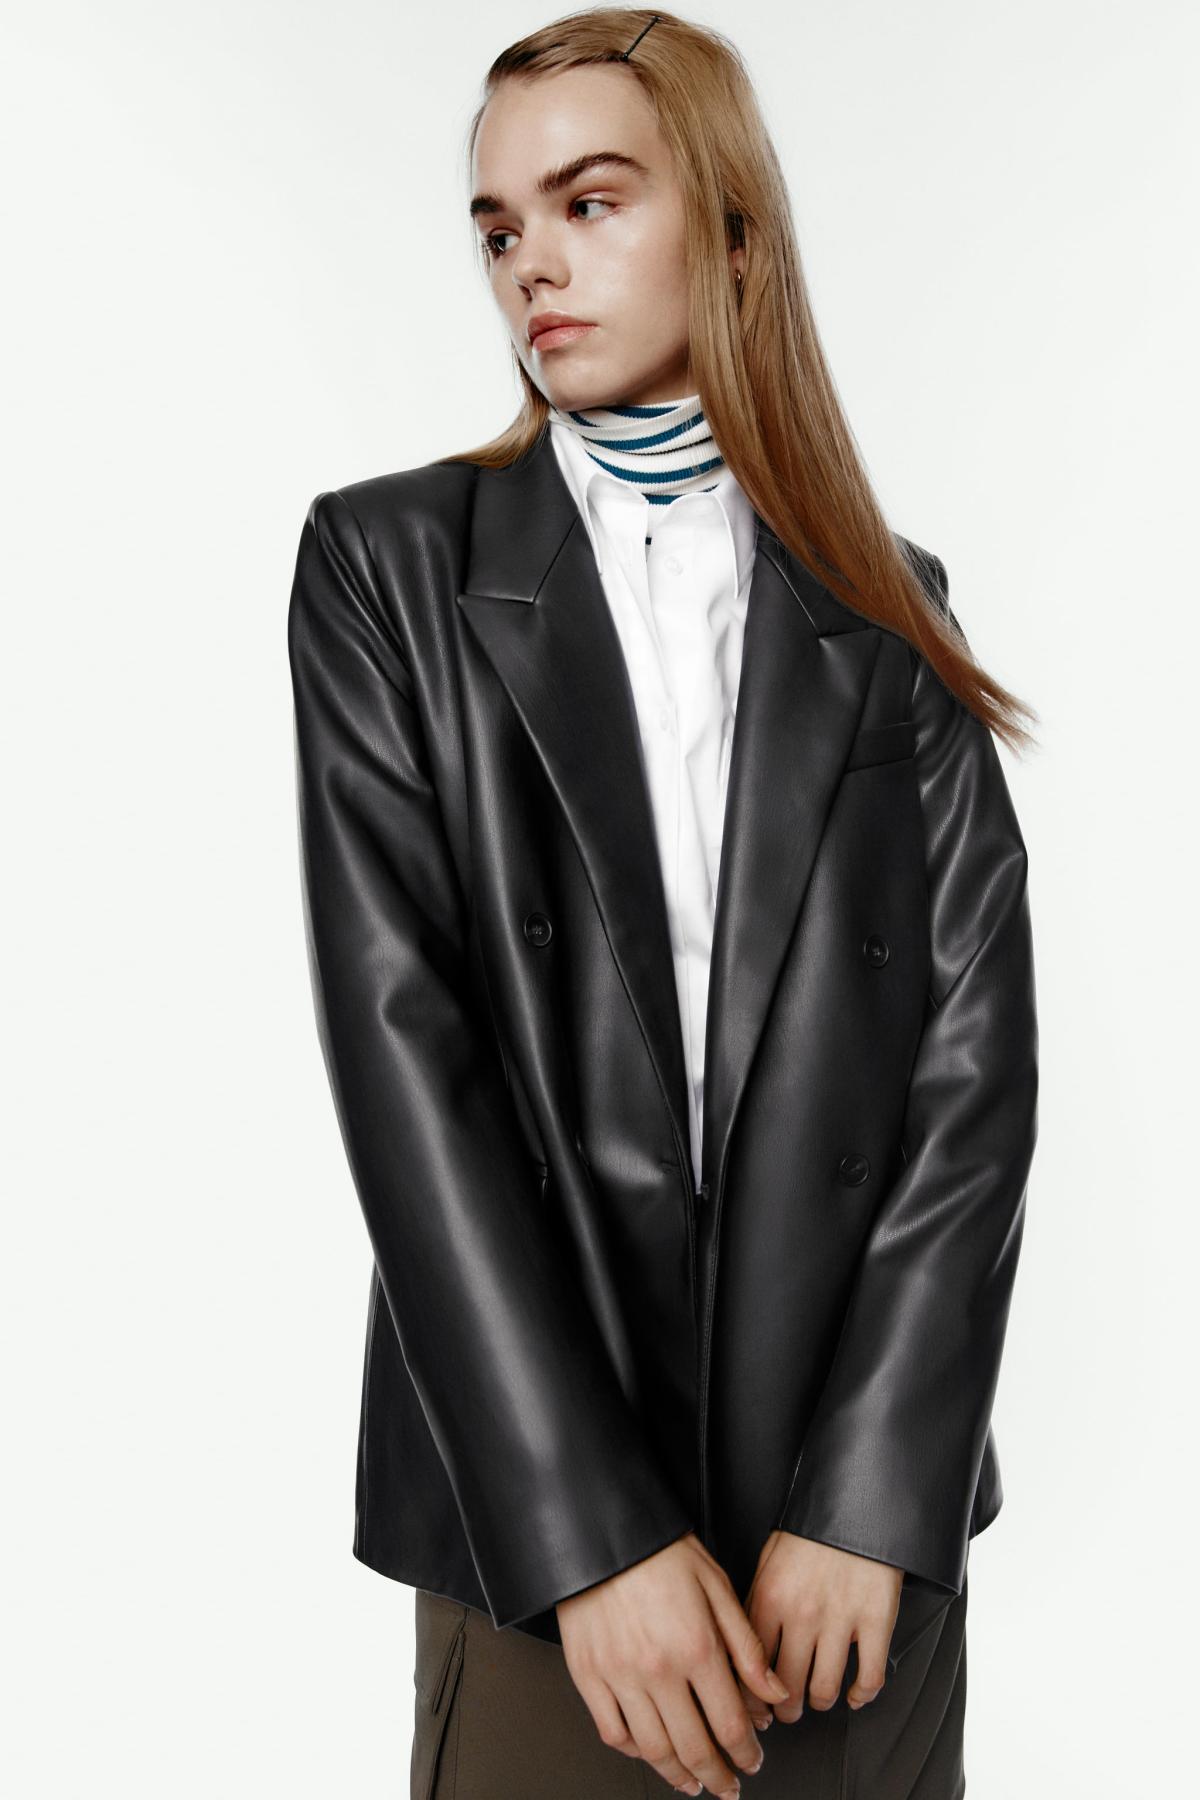 Embrace Power-Dressing This Fall With An Edgy Leather Blazer